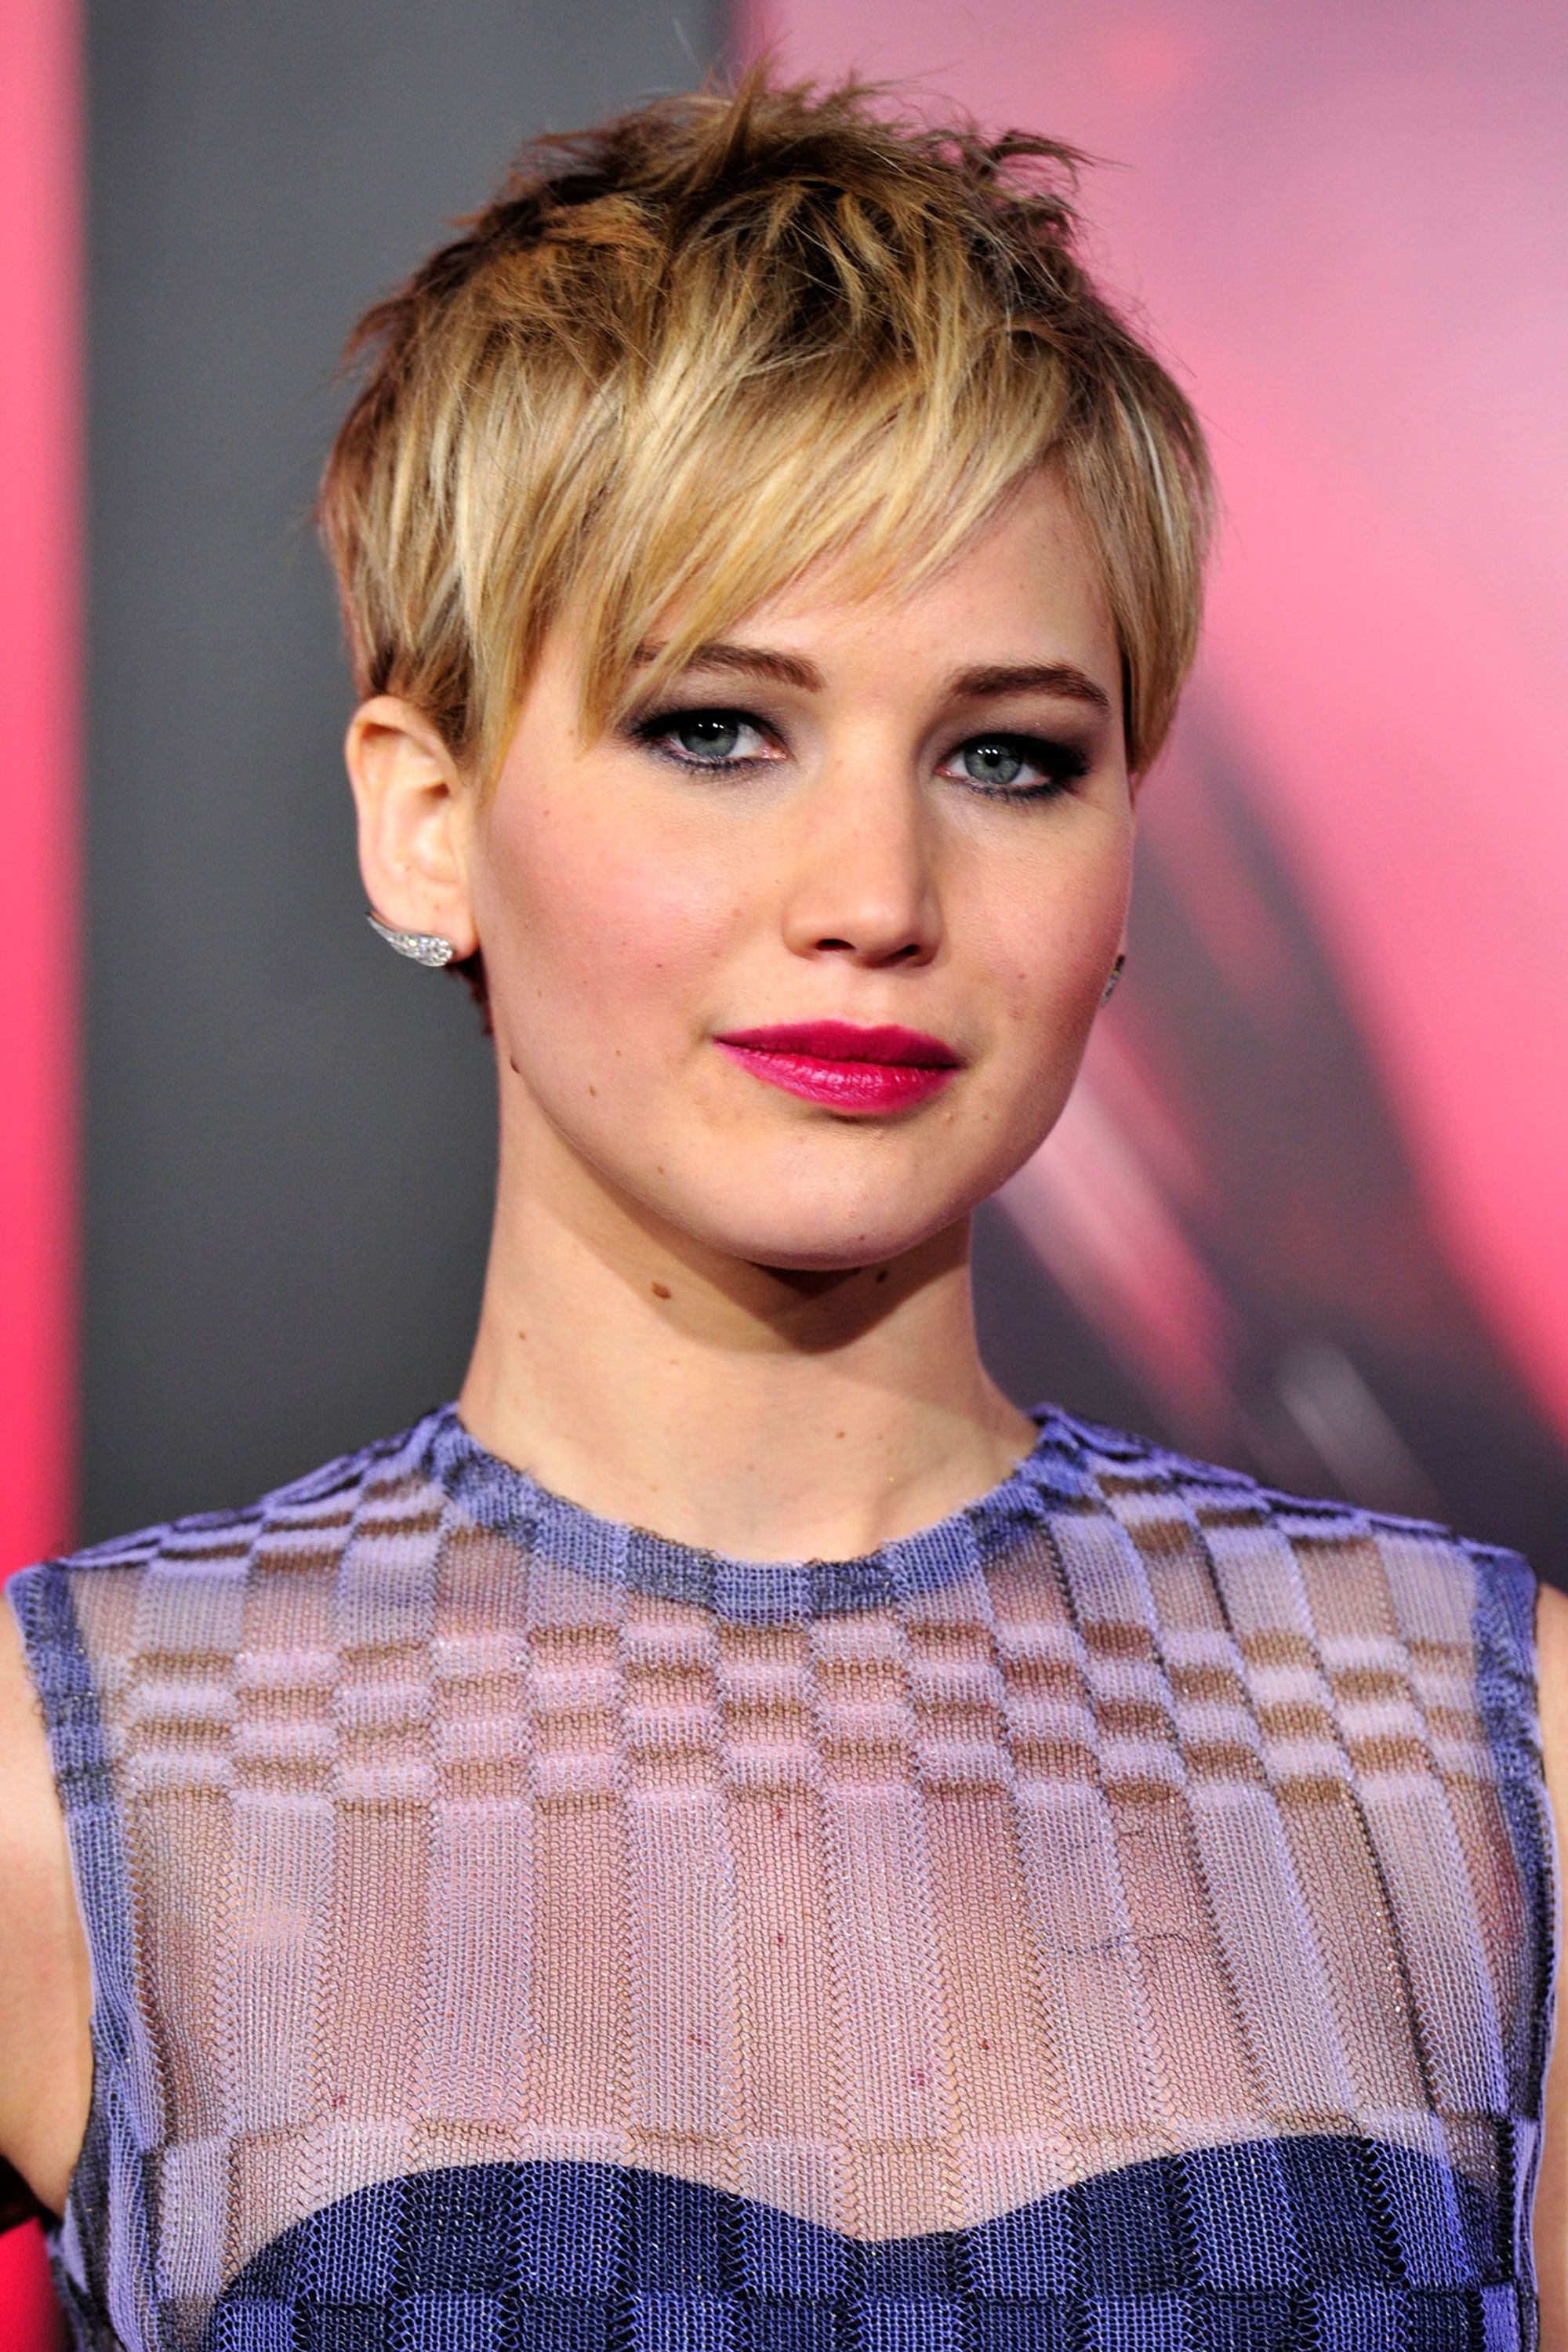 Pixie cuts | Best celebrity short hairstyle inspiration